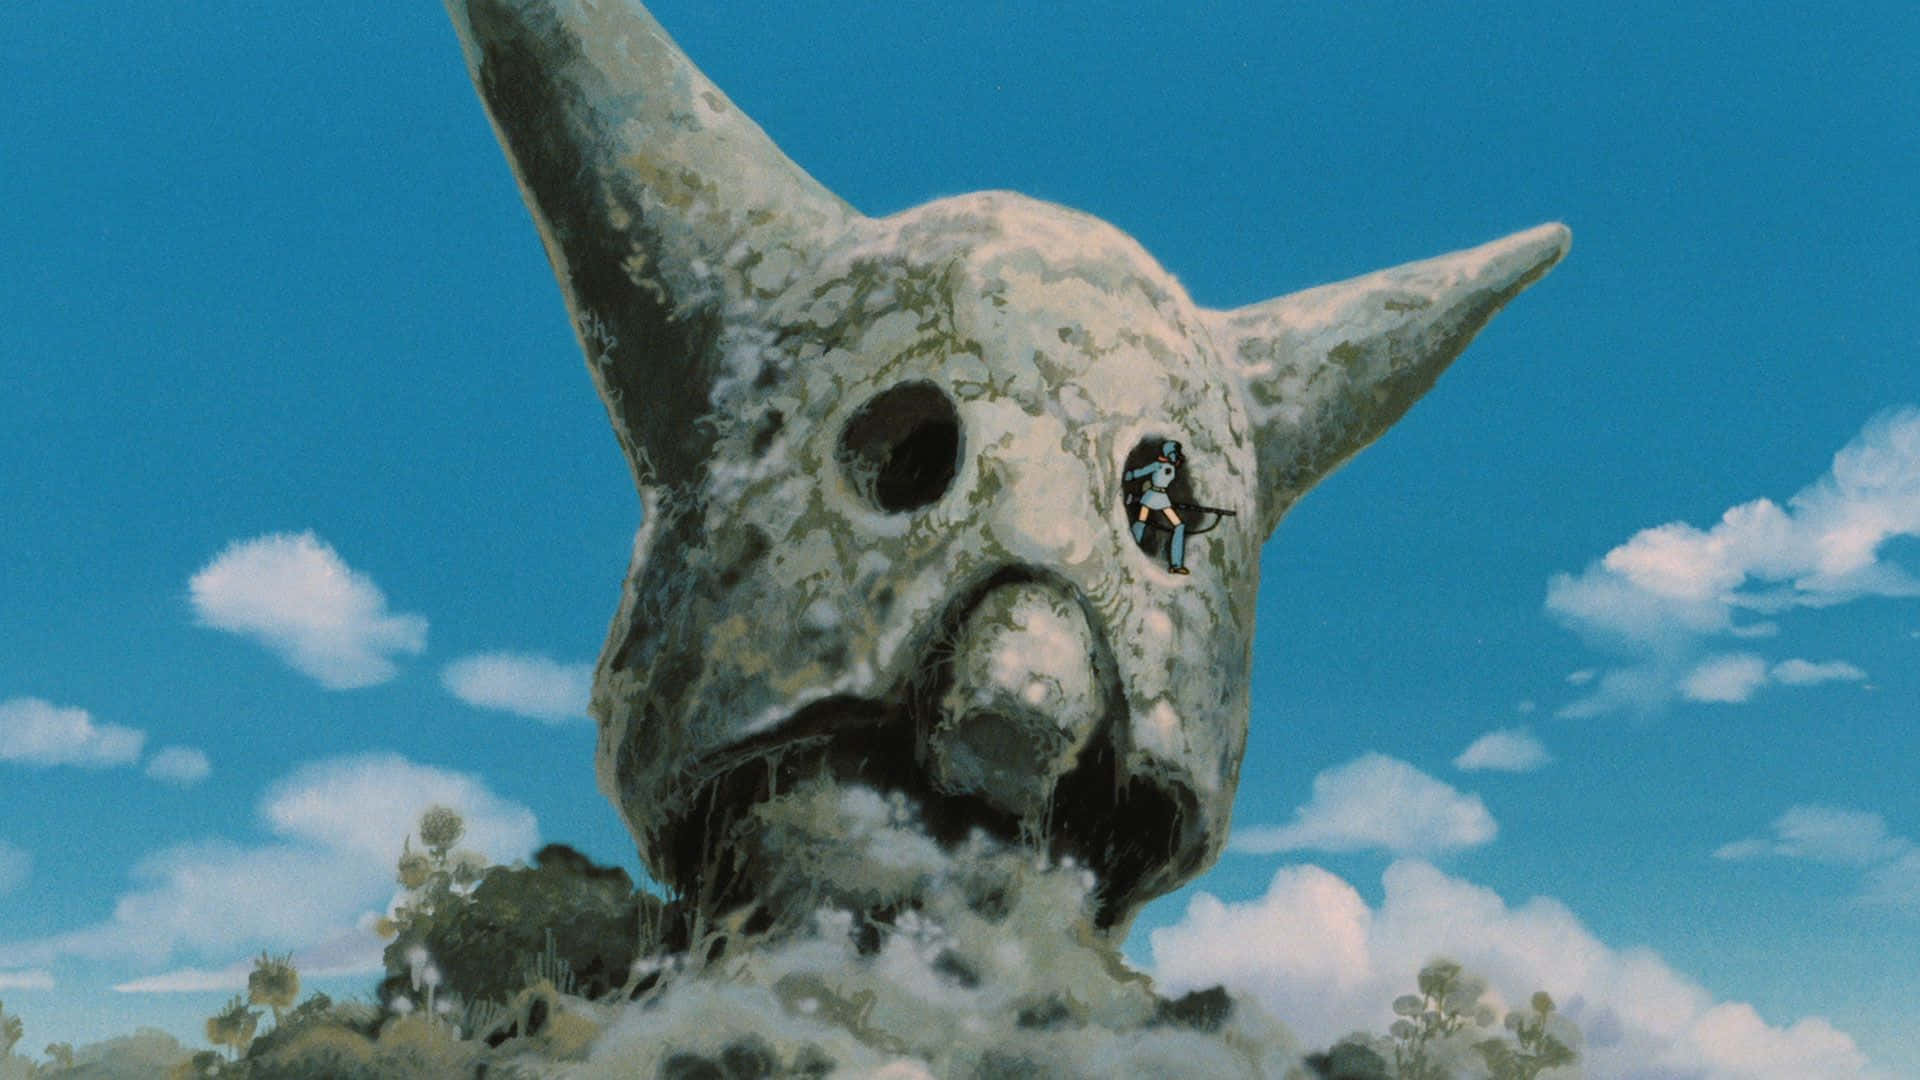 Nausicaä Soaring Through The Skies On Her Glider In The Valley Of The Wind Background